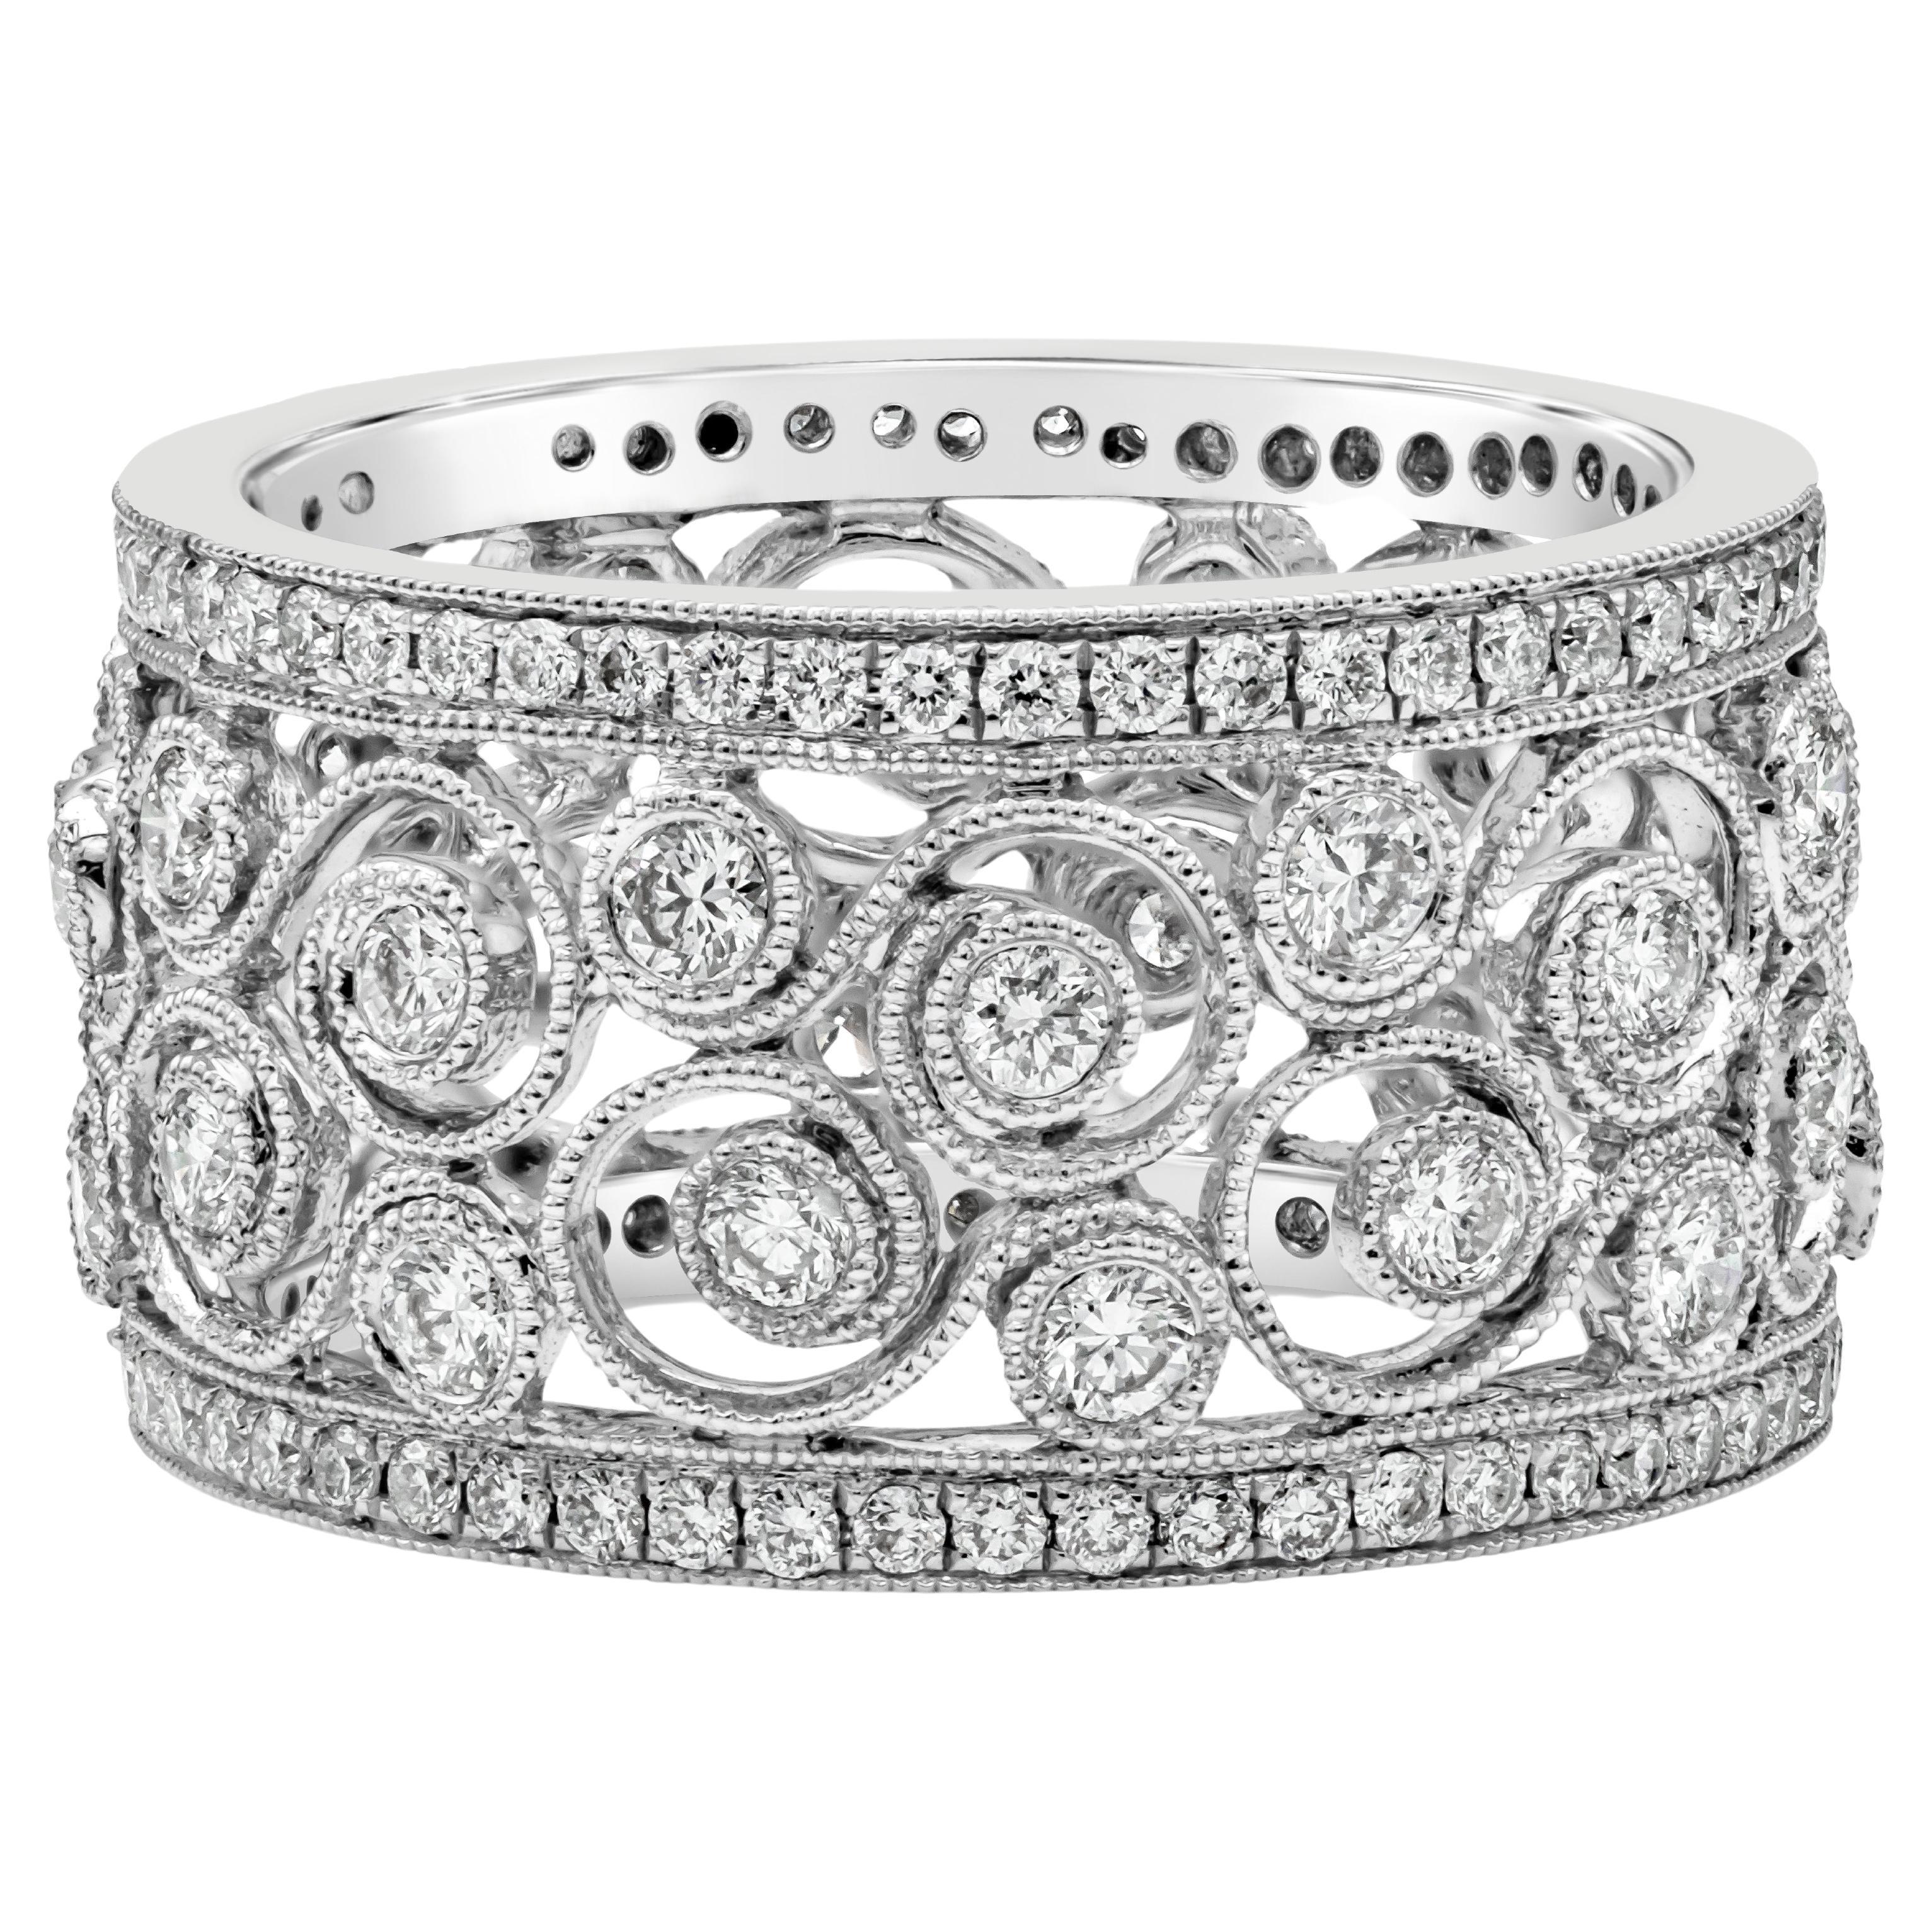 1.32 Carats Total Brilliant Round Cut Diamond Antique Style Wedding Band  For Sale